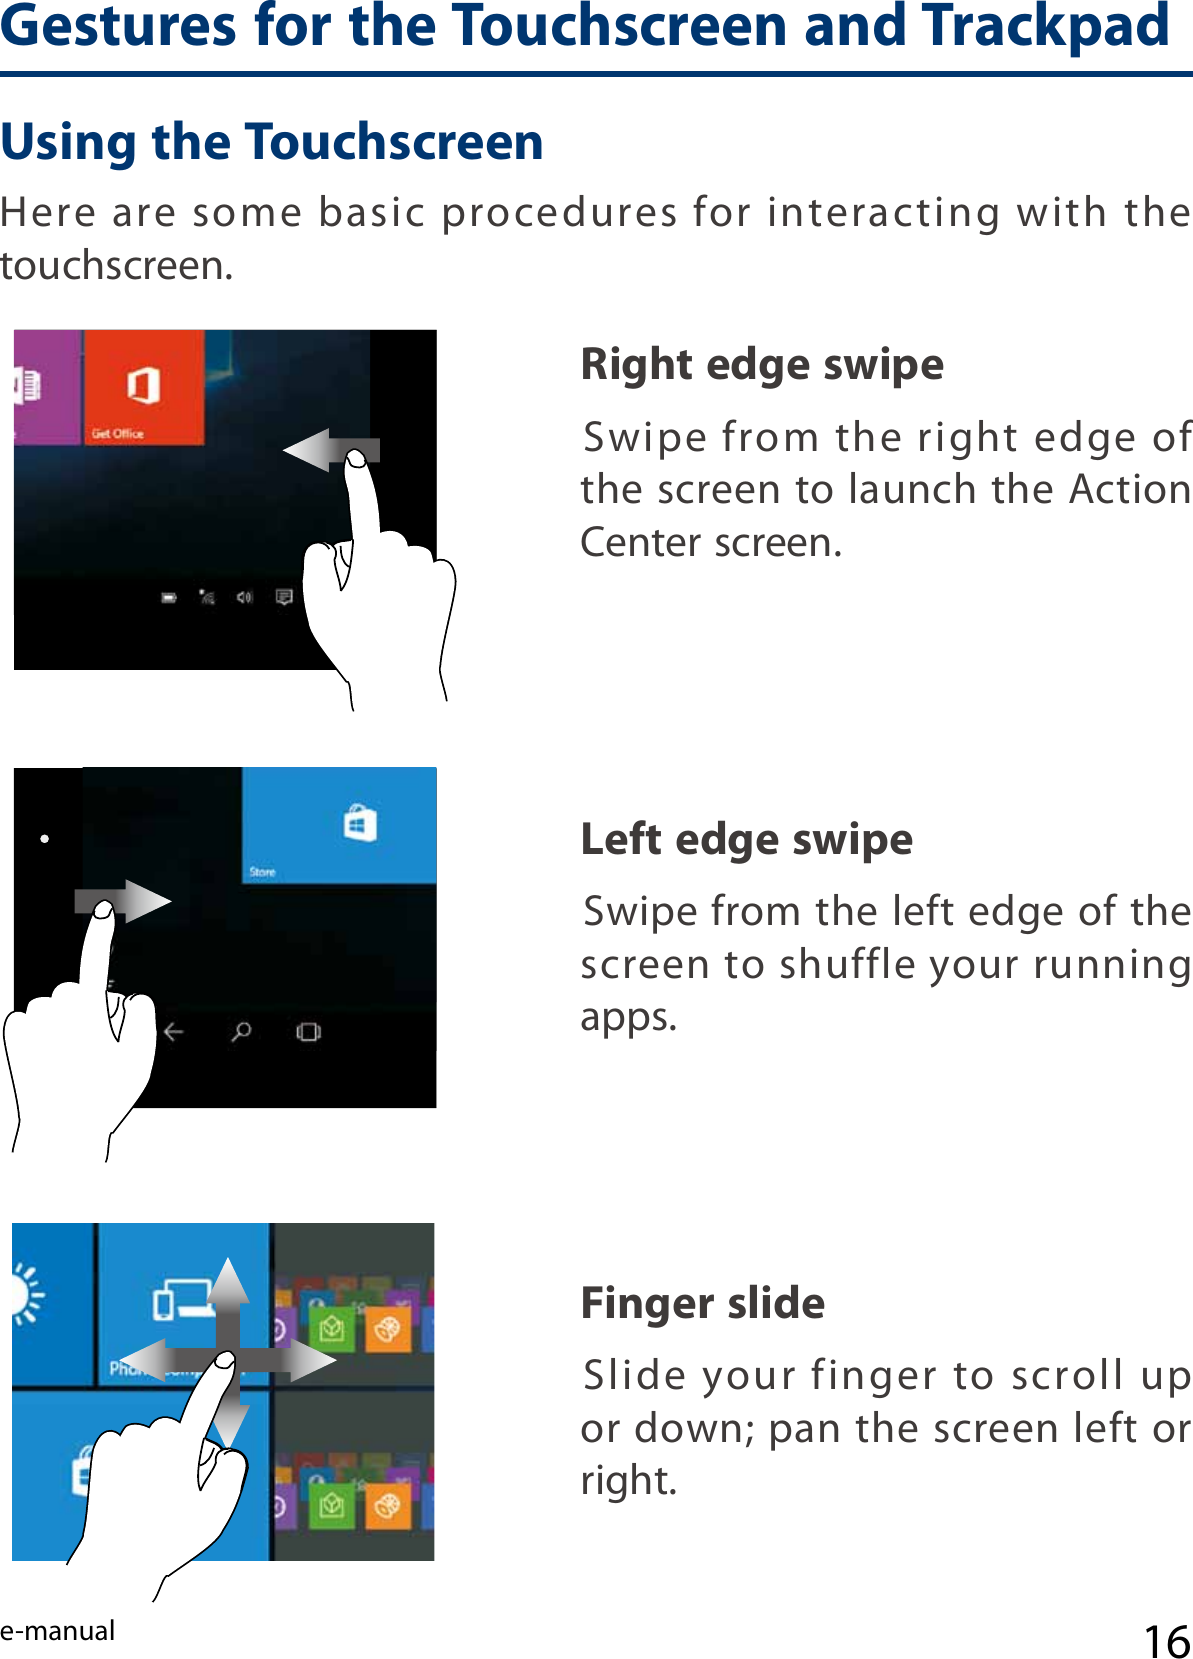 e-manual 16Finger slide  Slide your finger to scroll up or down; pan the screen left or right.Left edge swipe  Swipe from the left edge of the screen to shuffle your running apps.Here  are  some  basic  procedures  for  interacting  with  the touchscreen.Right edge swipe  Swipe from the right edge of the screen to launch the Action Center screen.Using the TouchscreenGestures for the Touchscreen and Trackpad